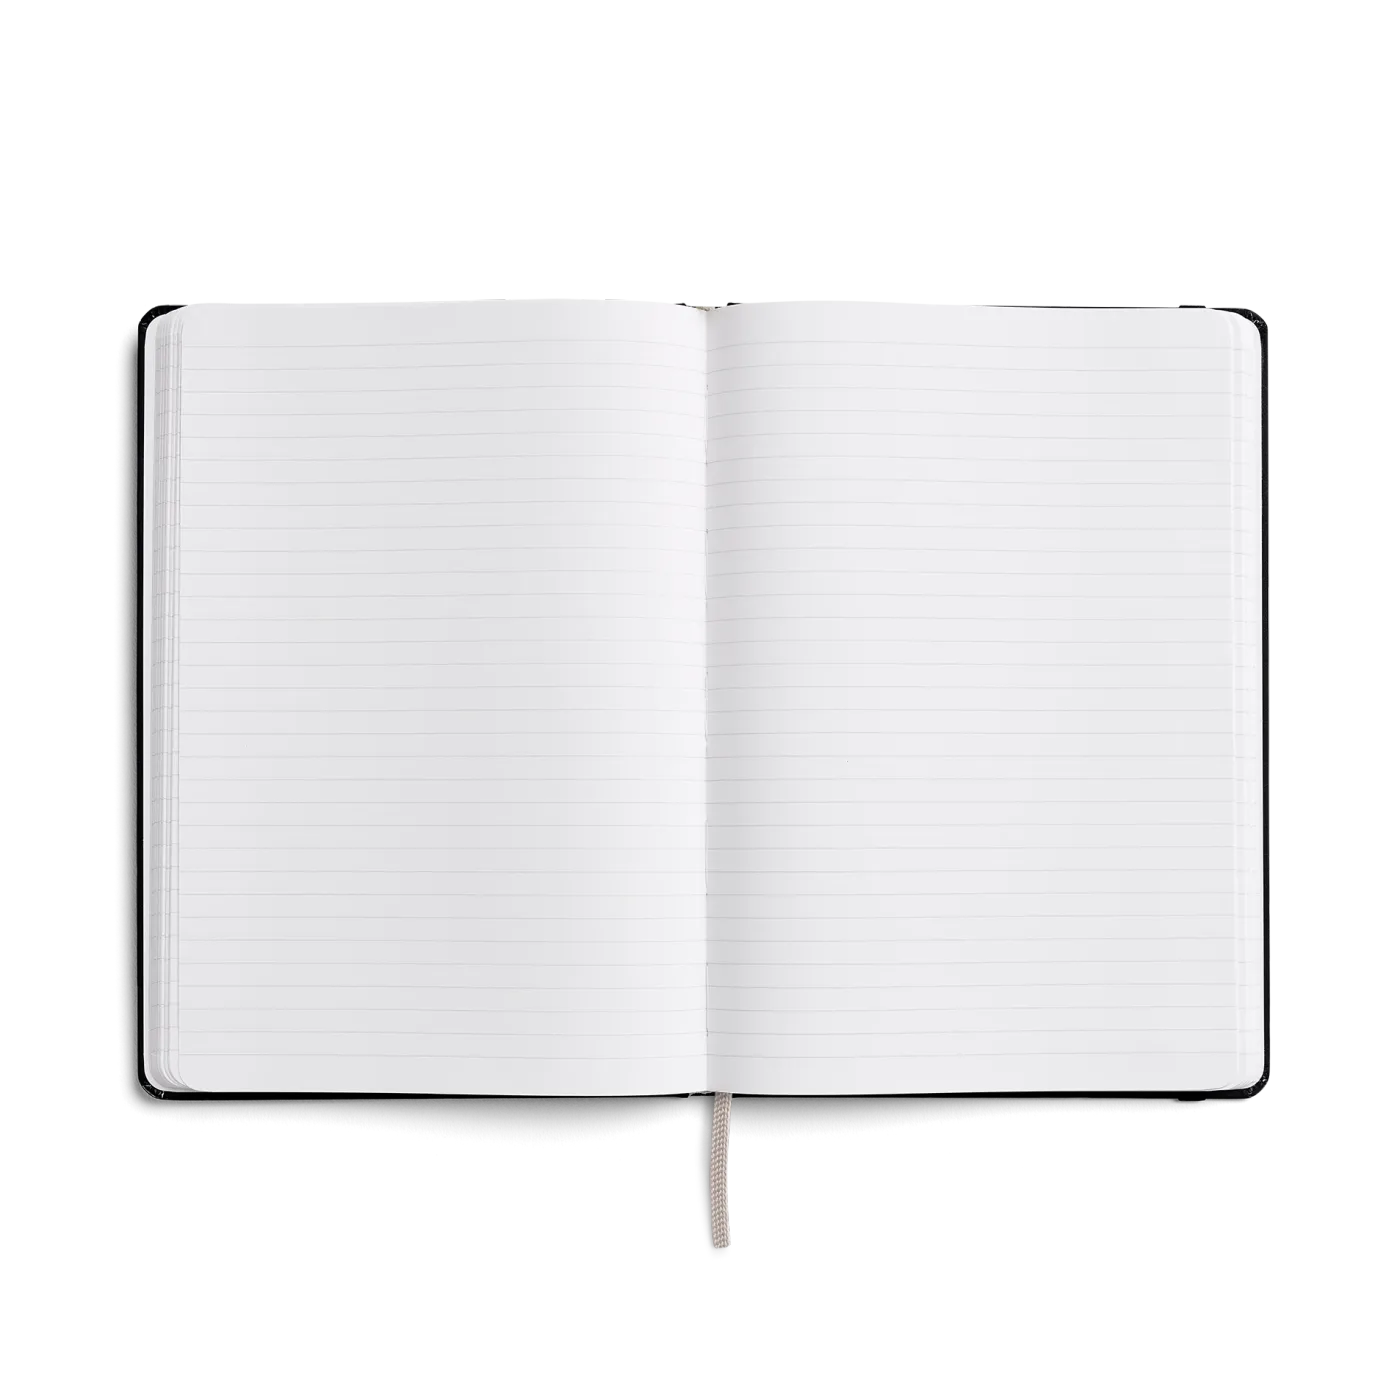 Karst Notebook A5 Hardcover - Stone (Lined)